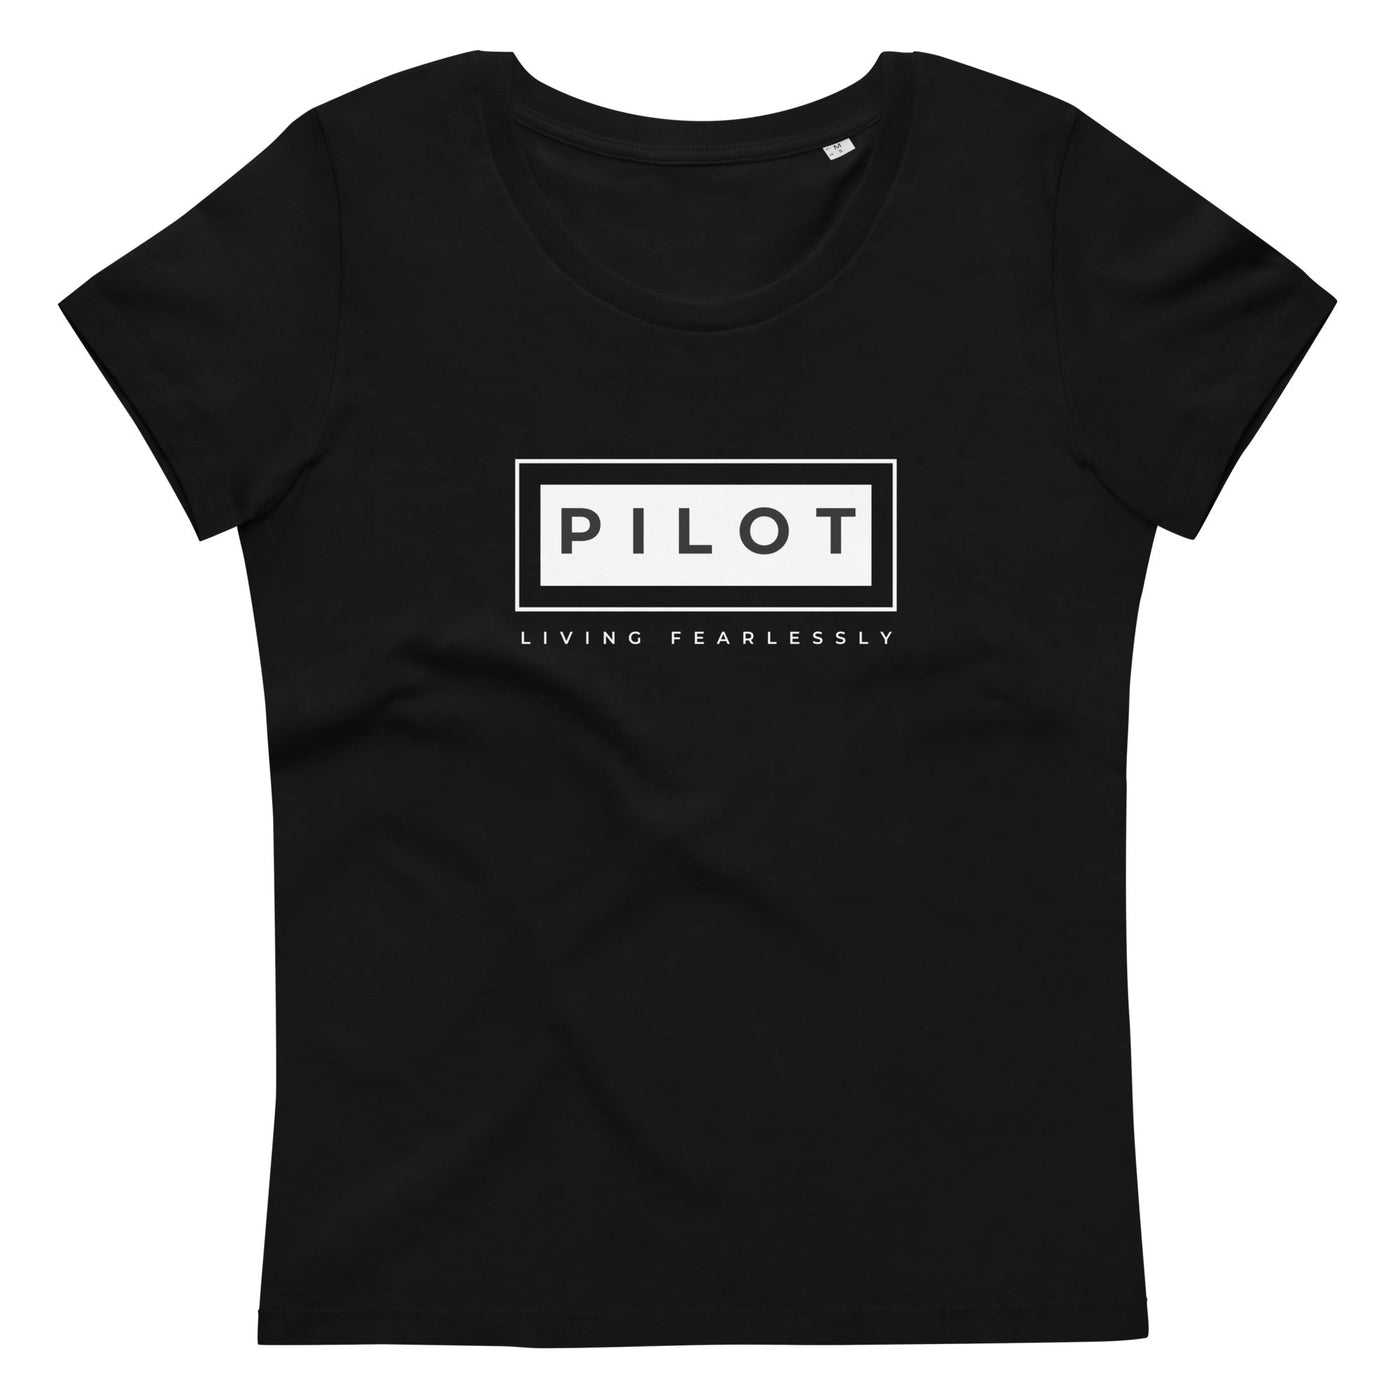 Get trendy with Women's fitted eco tee- PILOT -  available at SWCH Store. Grab yours for £30 today!